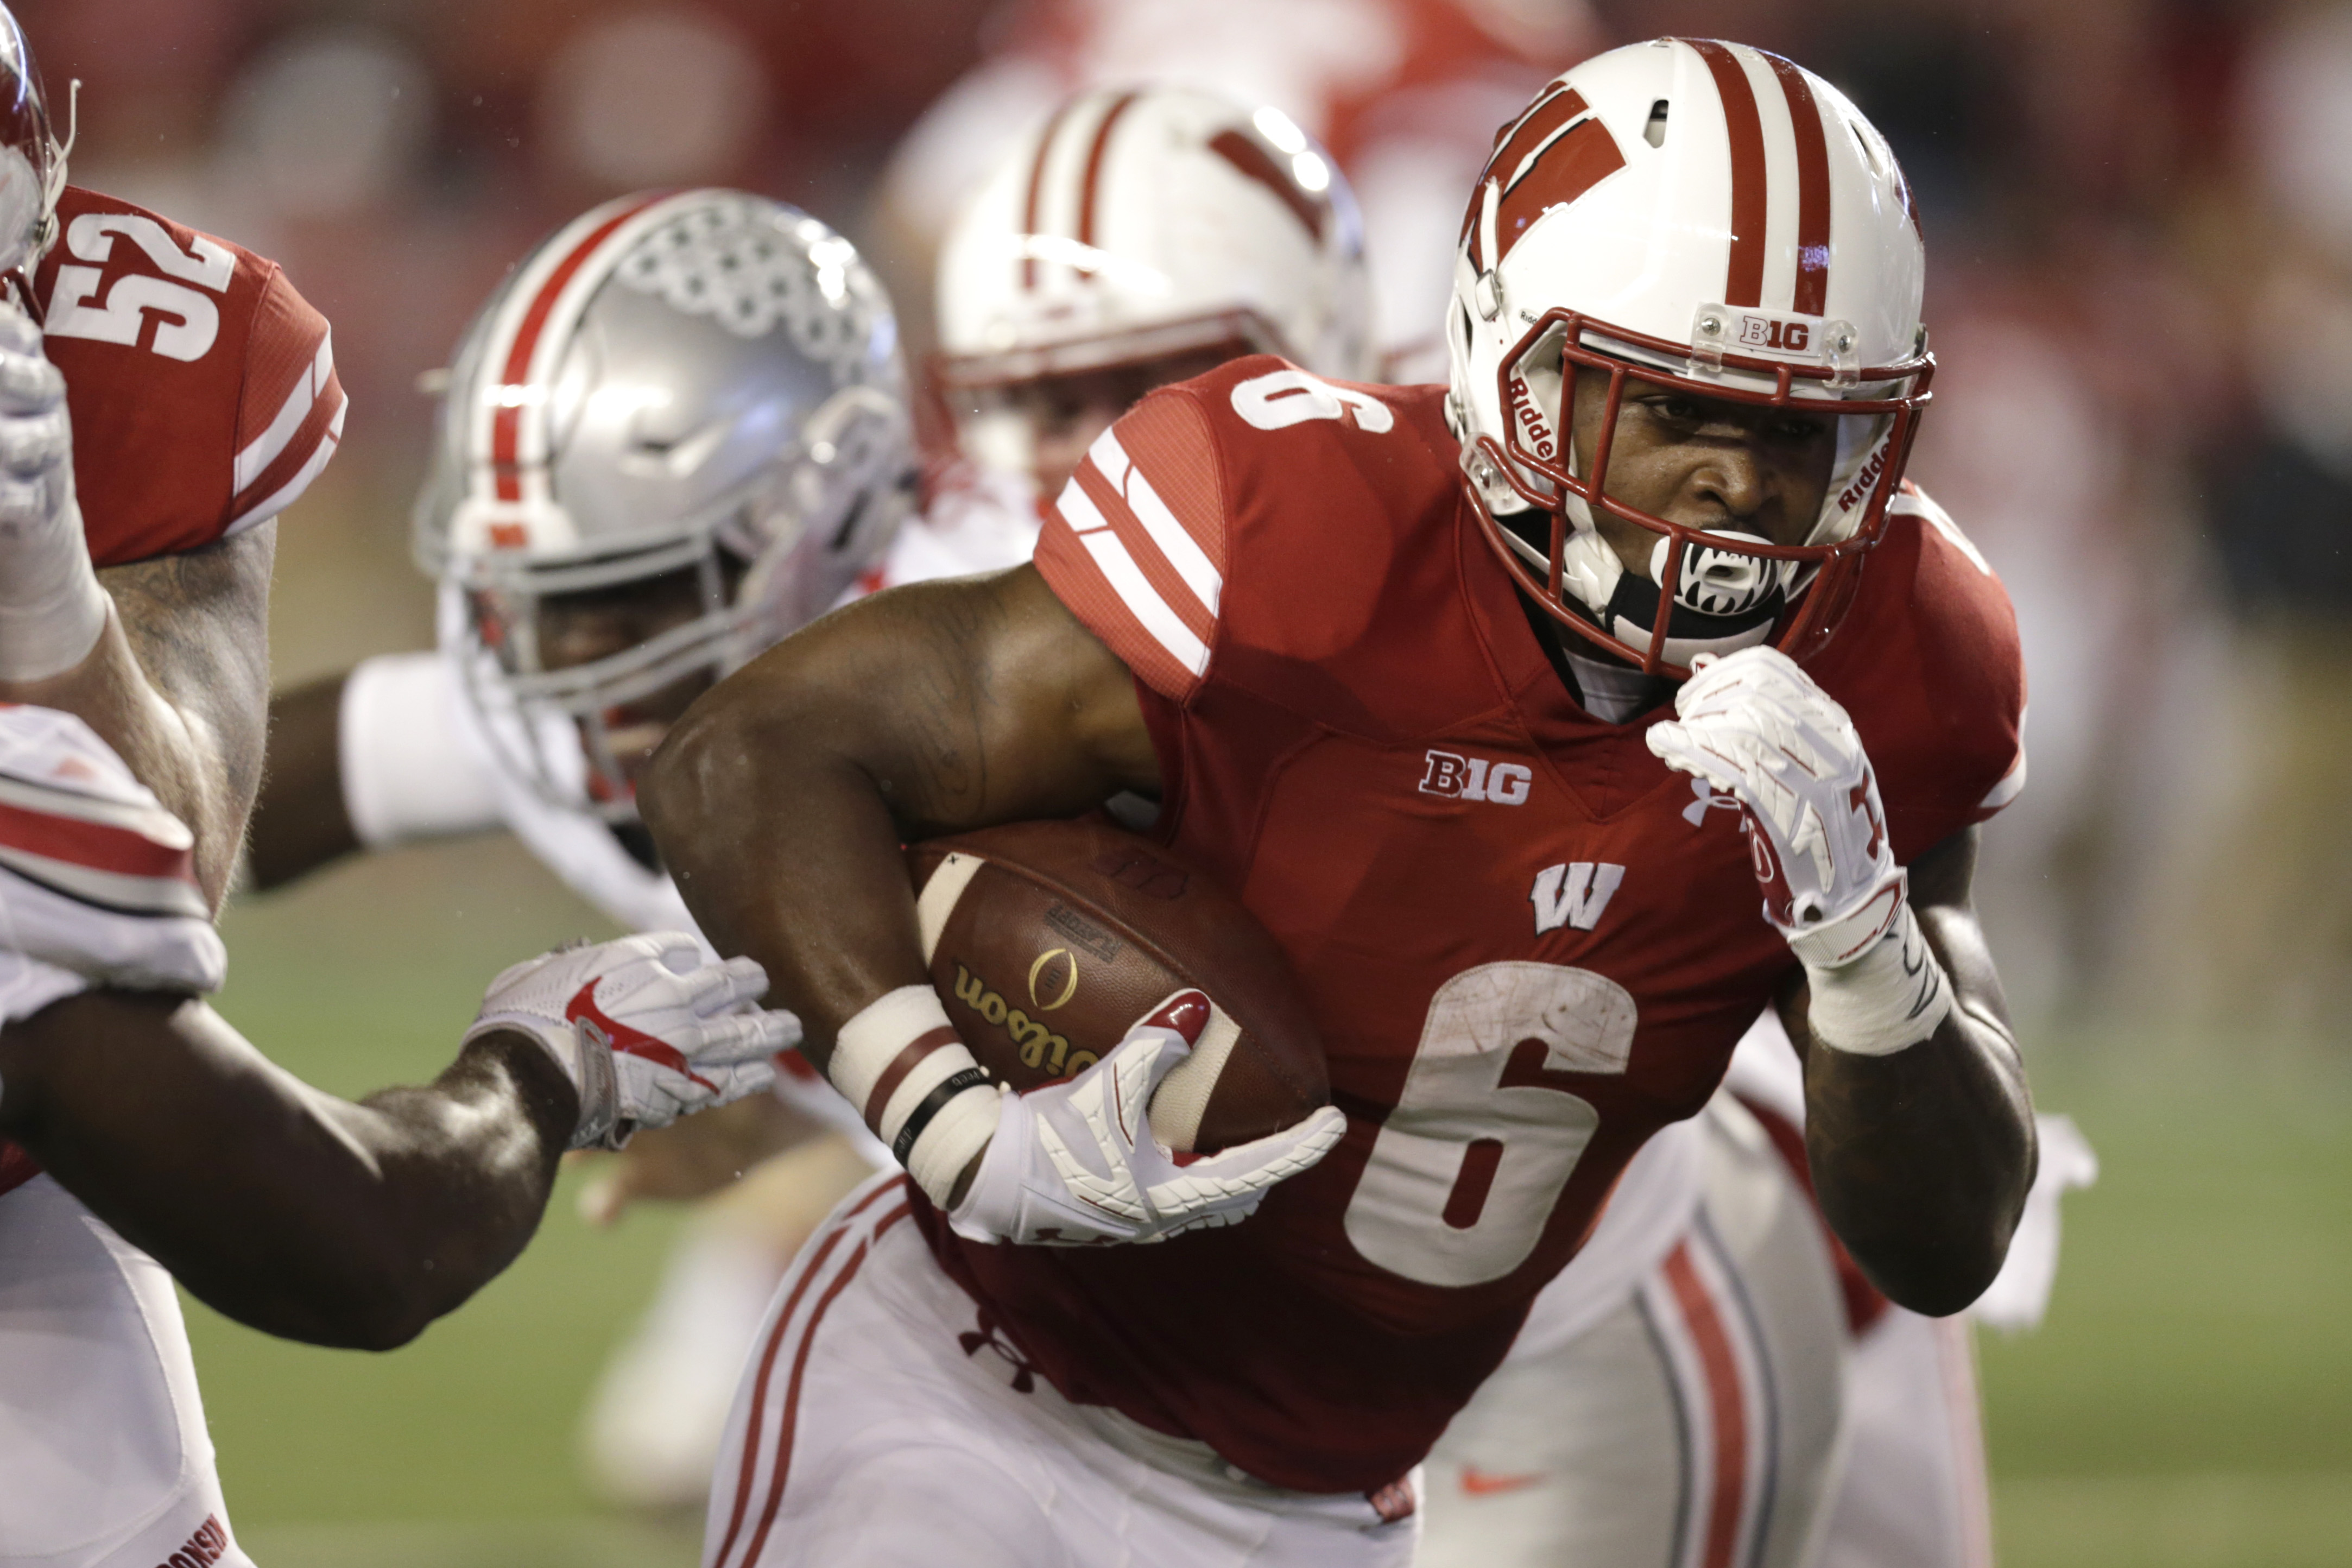 Badgers tripped up by Buckeyes in 30-23 OT Thriller